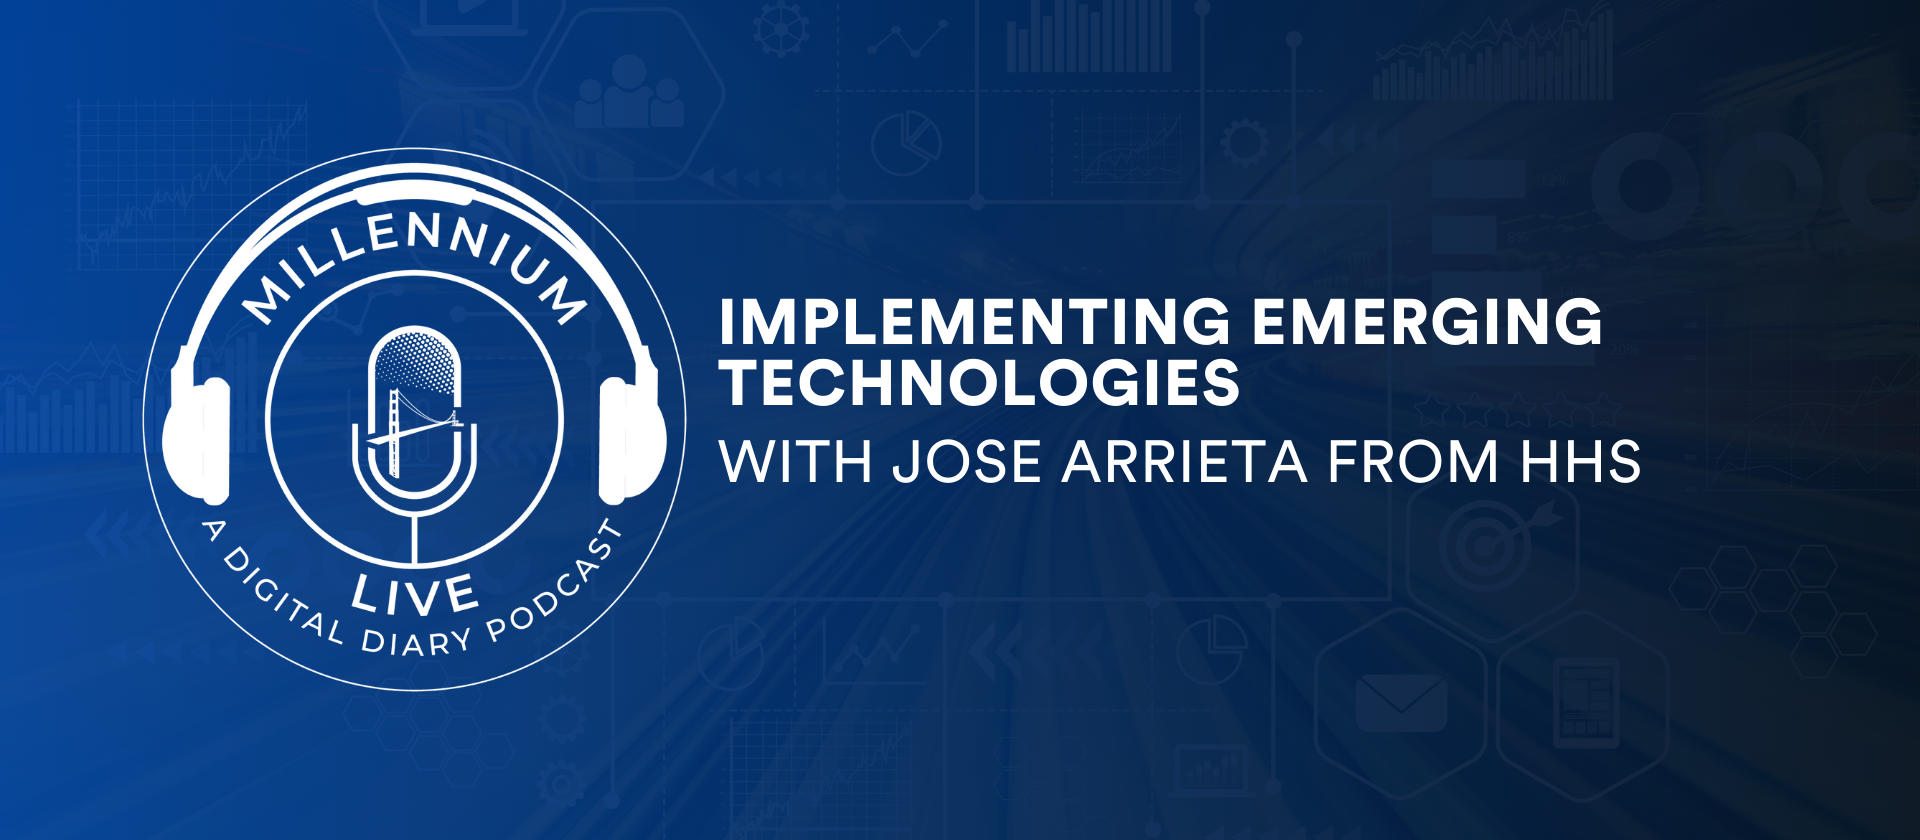 #MillenniumLive on Implementing Emerging Technologies with Jose Arrieta